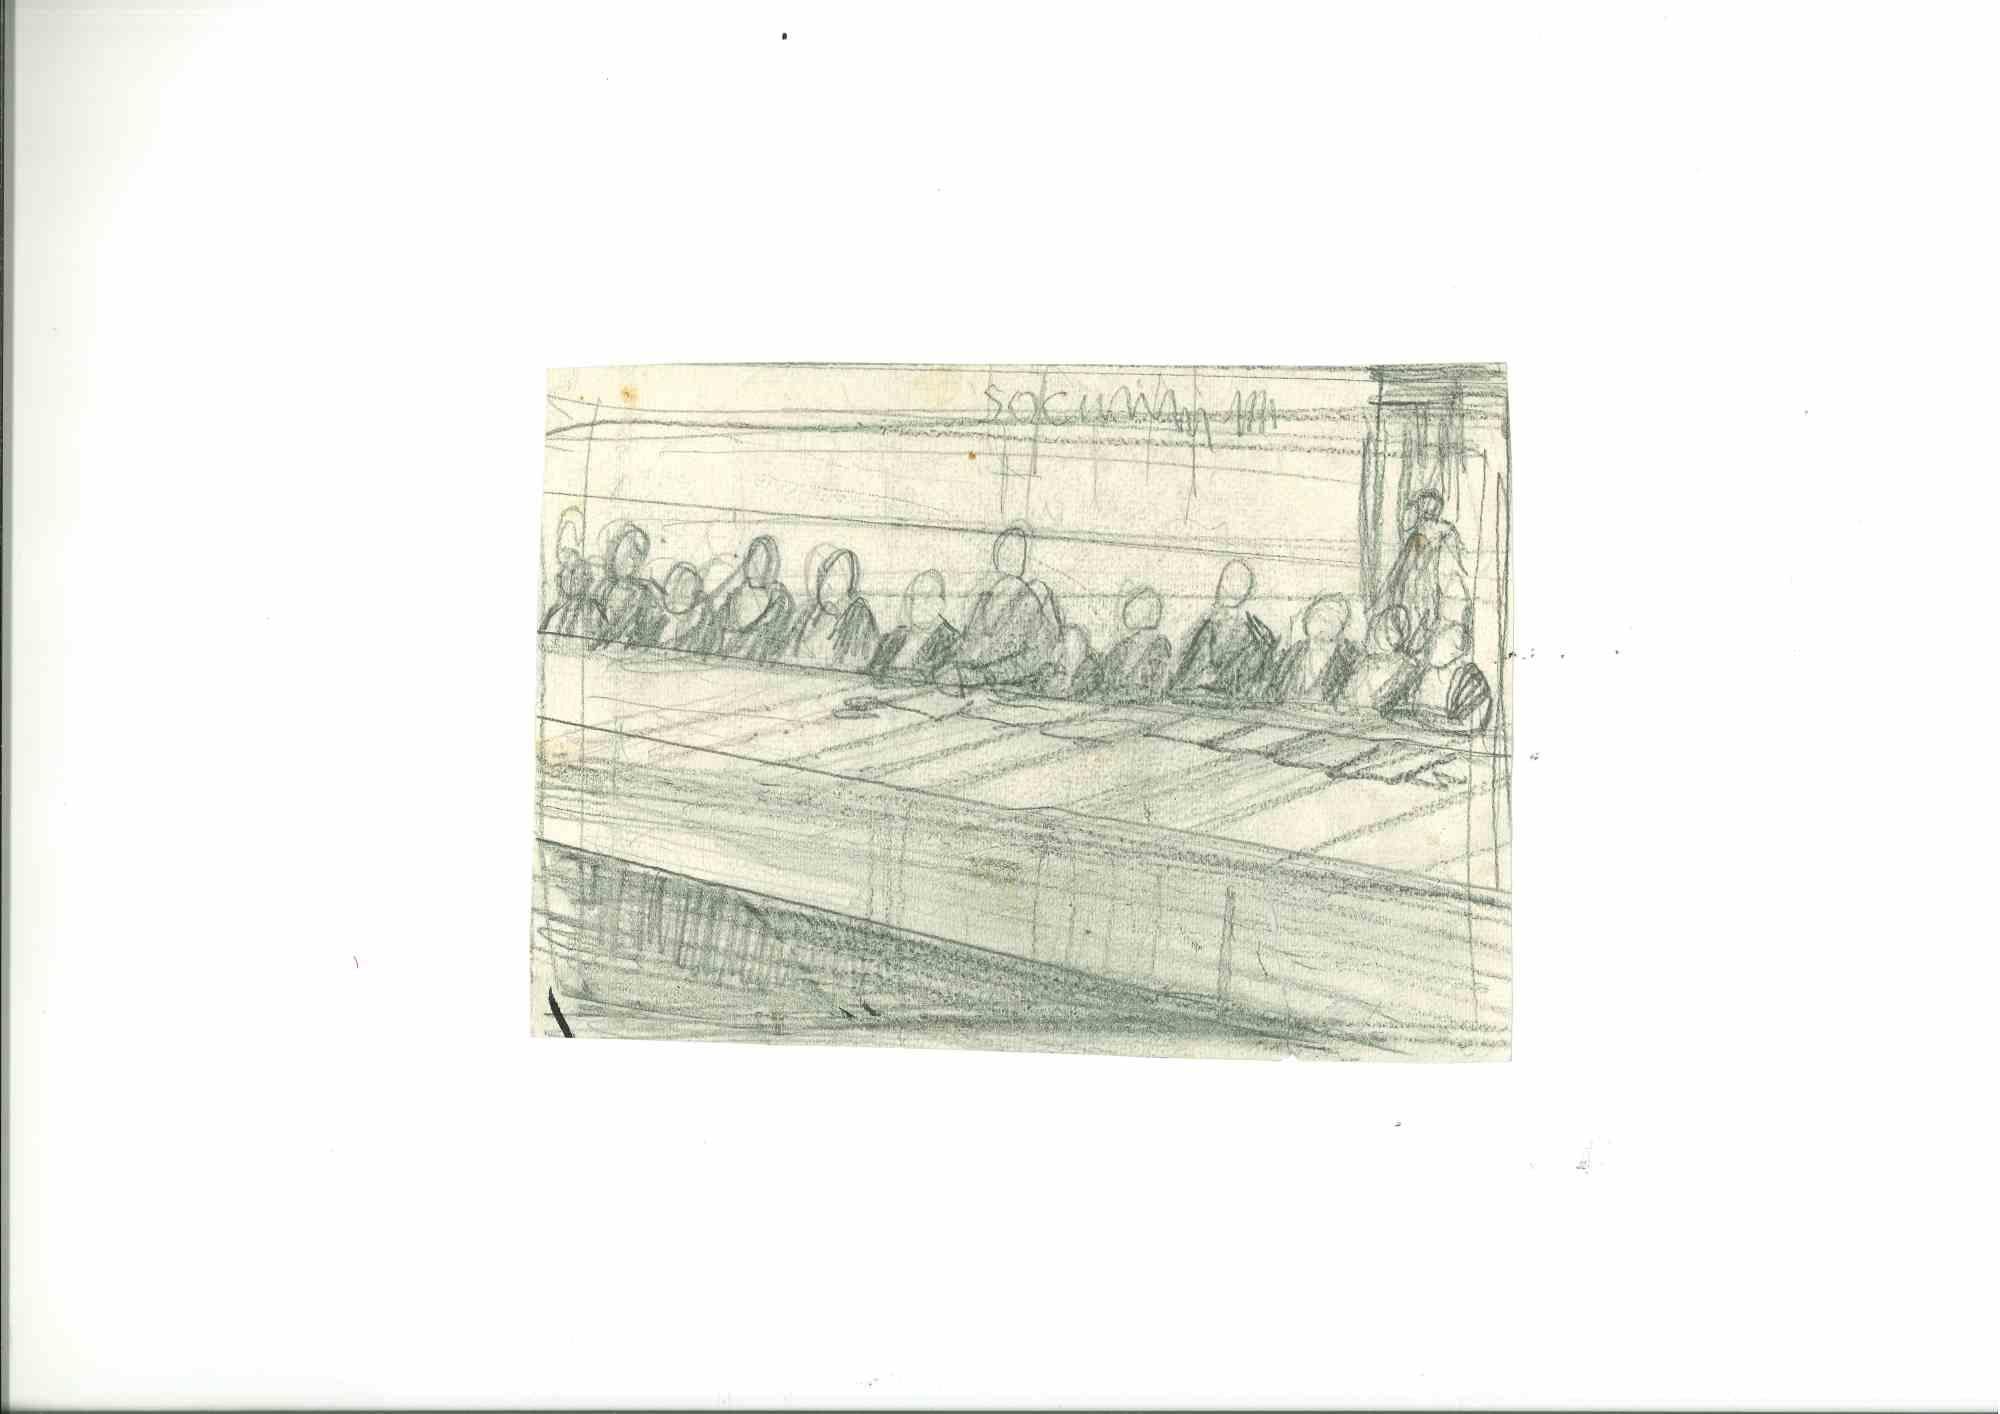 The Court  is a modern artwork by  Gabriele Galantara (1865-1937) in the early 20th Century.

Pencil on paper.

Good conditions. 

Gabriele Galantara  (1865-1937). He was a journalist and one of the leading Italian caricaturists and cartoonists.